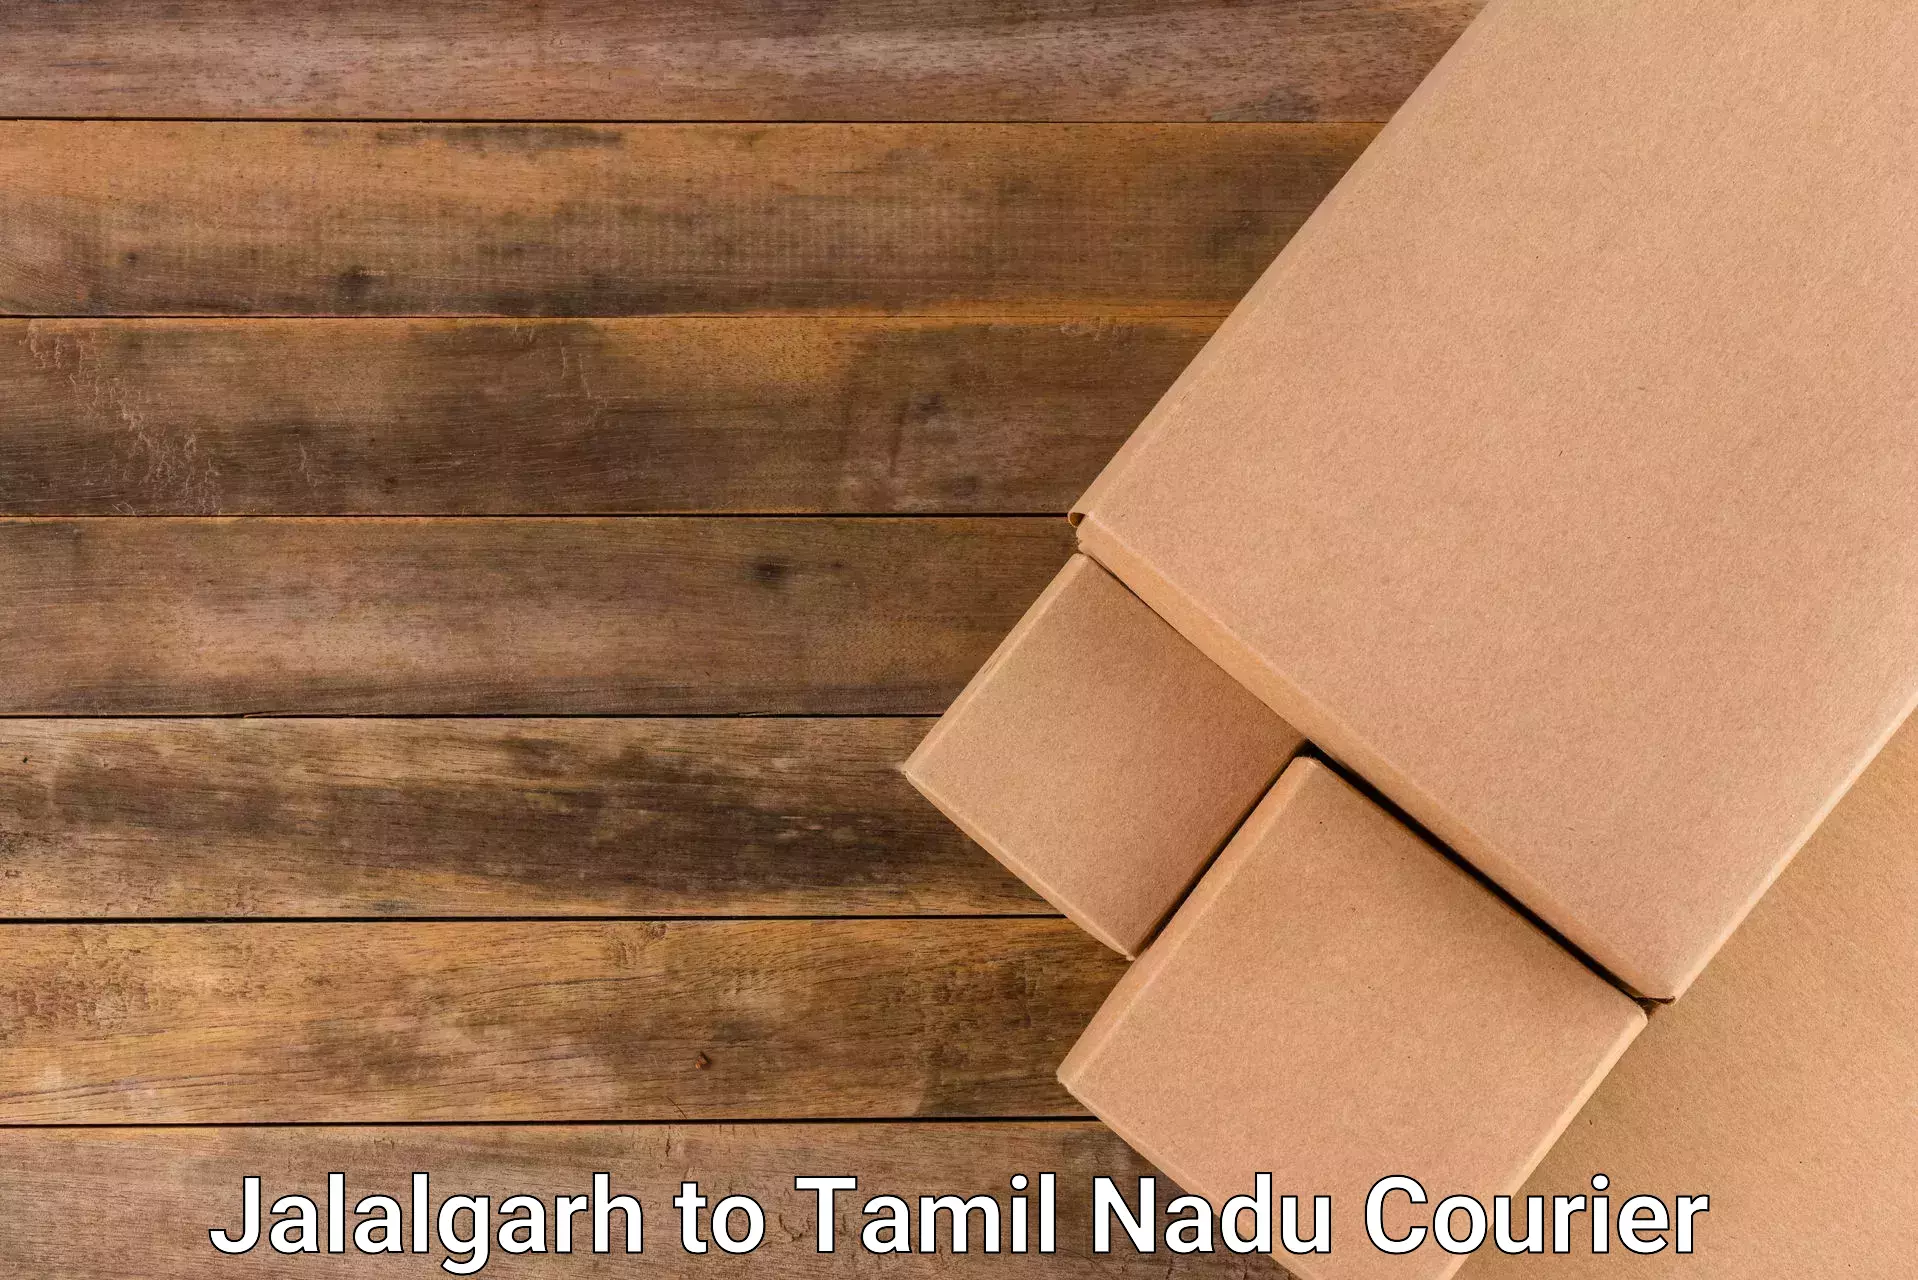 Courier services Jalalgarh to Coimbatore